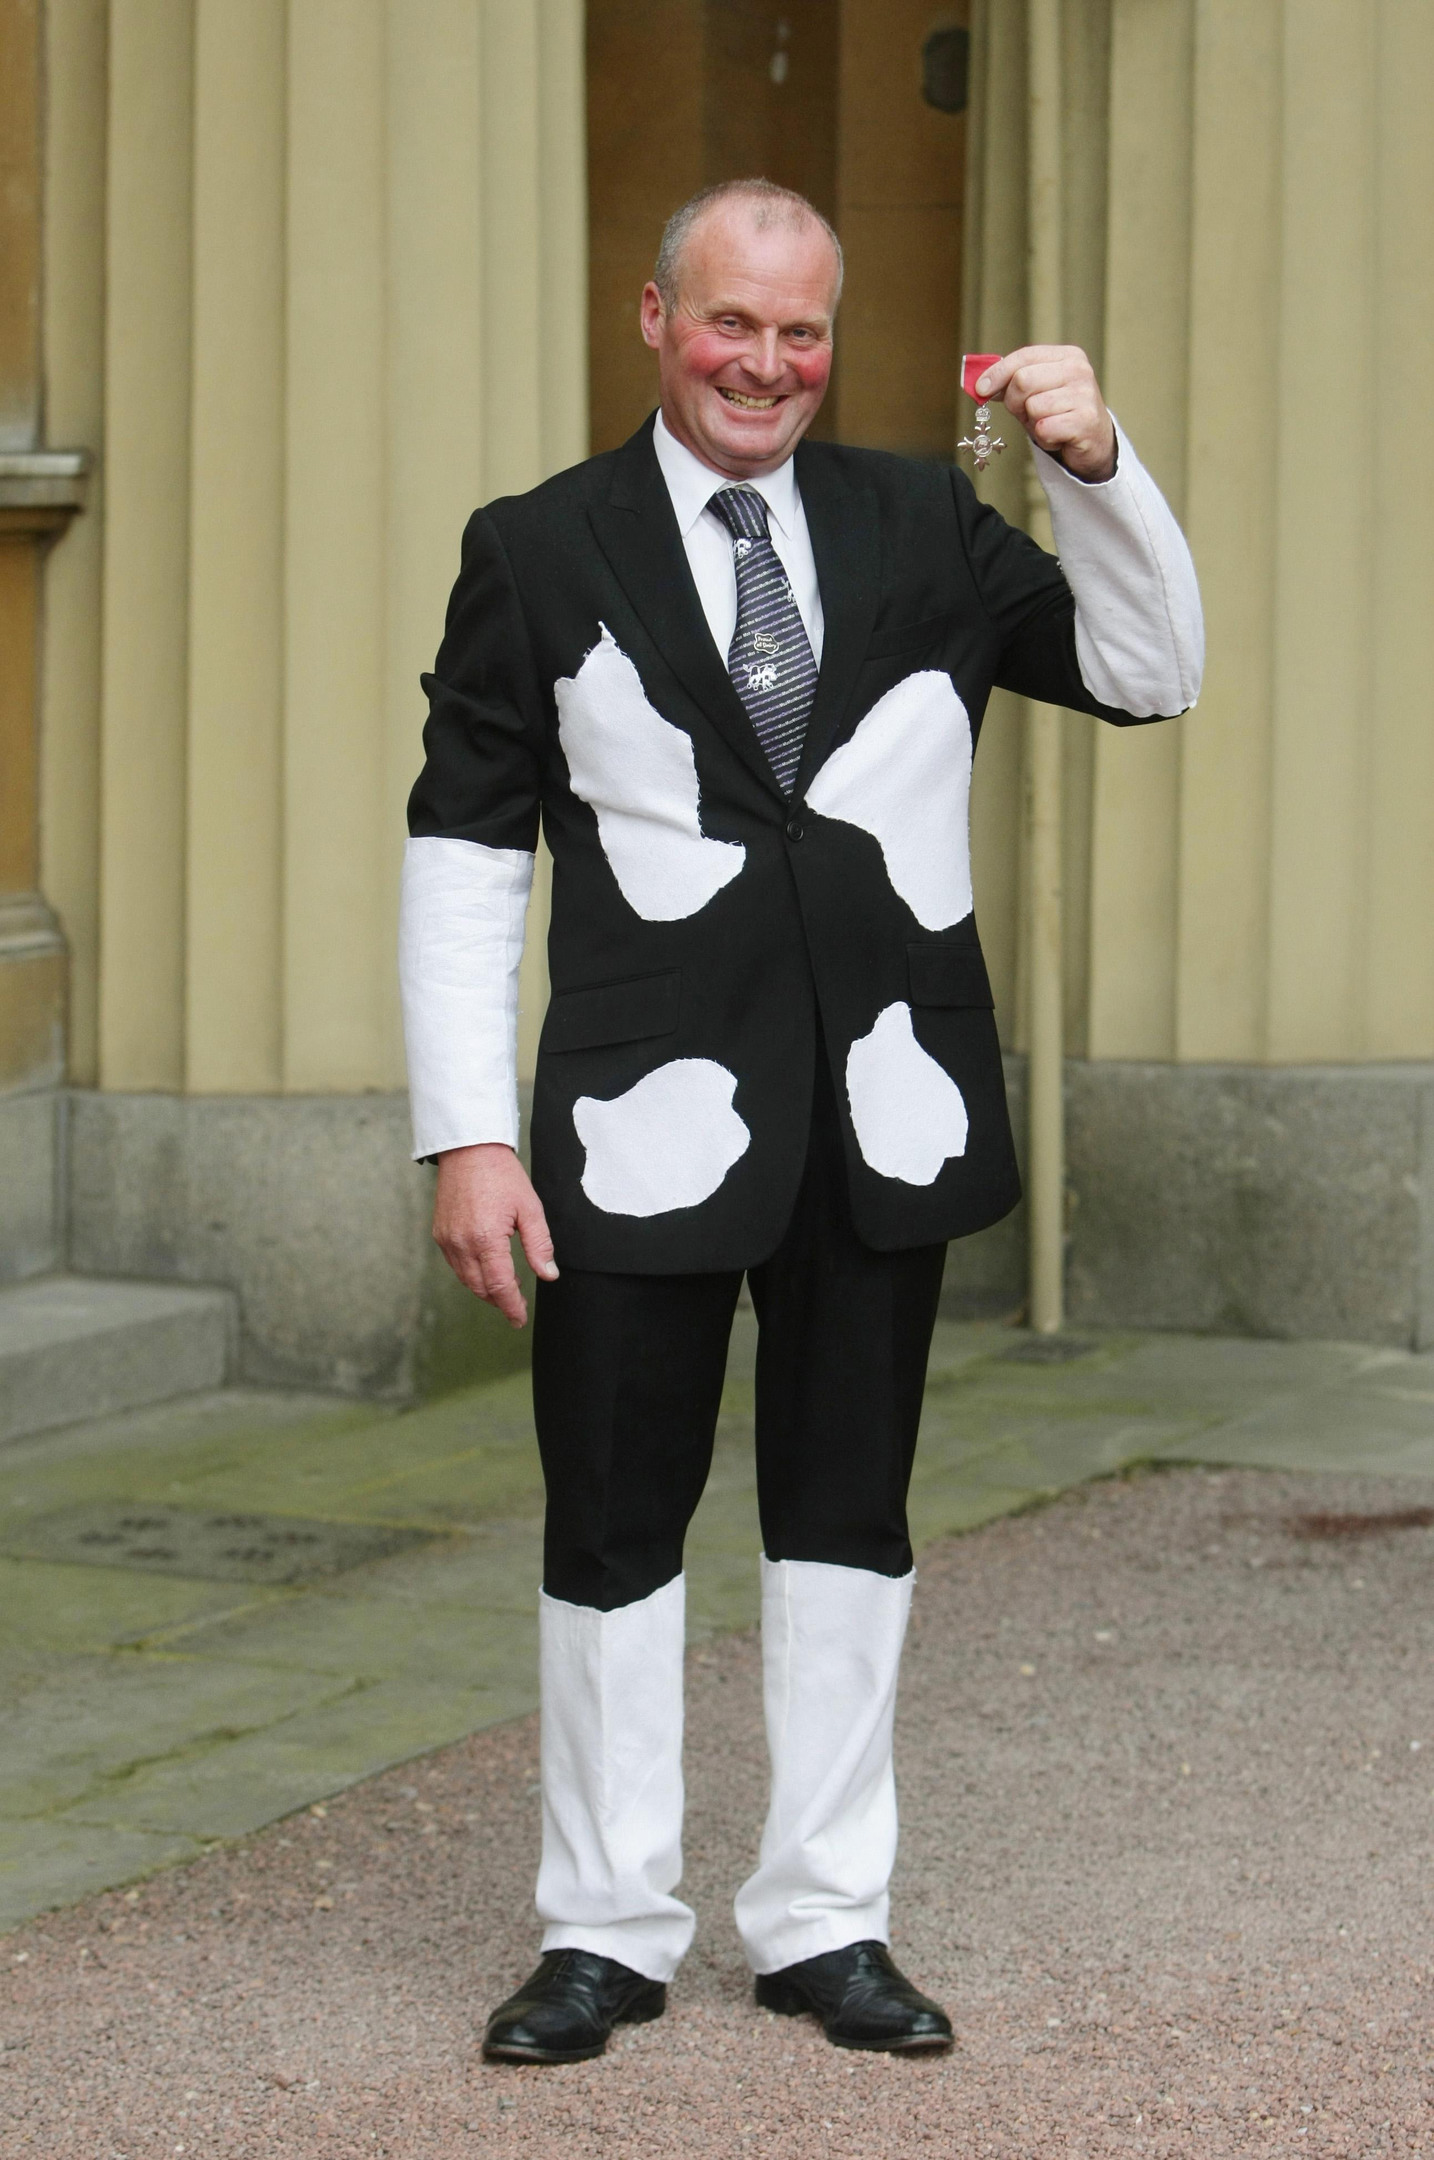 Dressed in a suit resembling a Friesan cow, milkman Tony Fowler holds the MBE he received from Queen Elizabeth II at Buckingham Palace in London (PA)